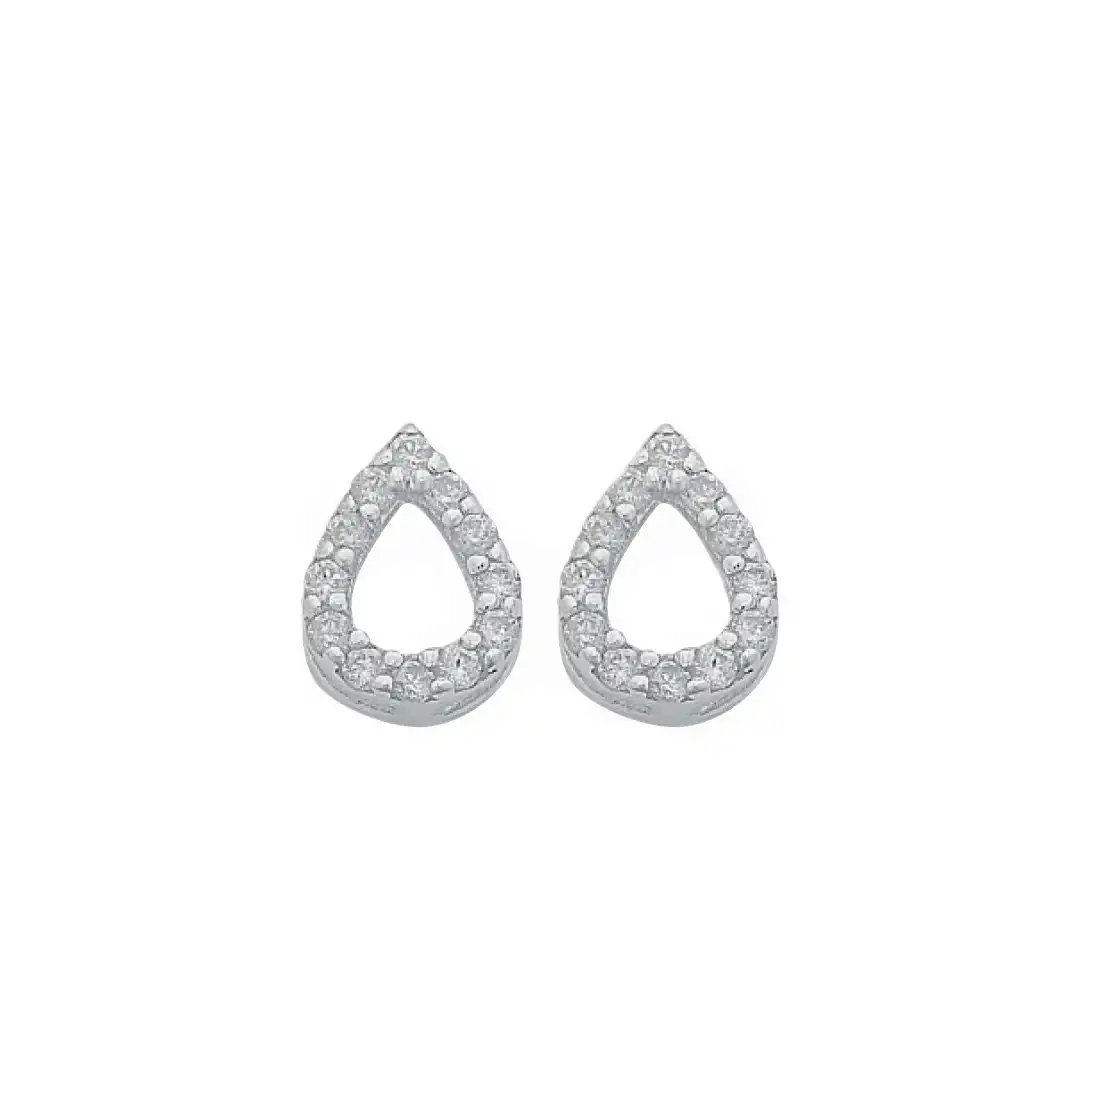 Sterling Silver and Cubic Zirconia Open Pear Stud Earrings